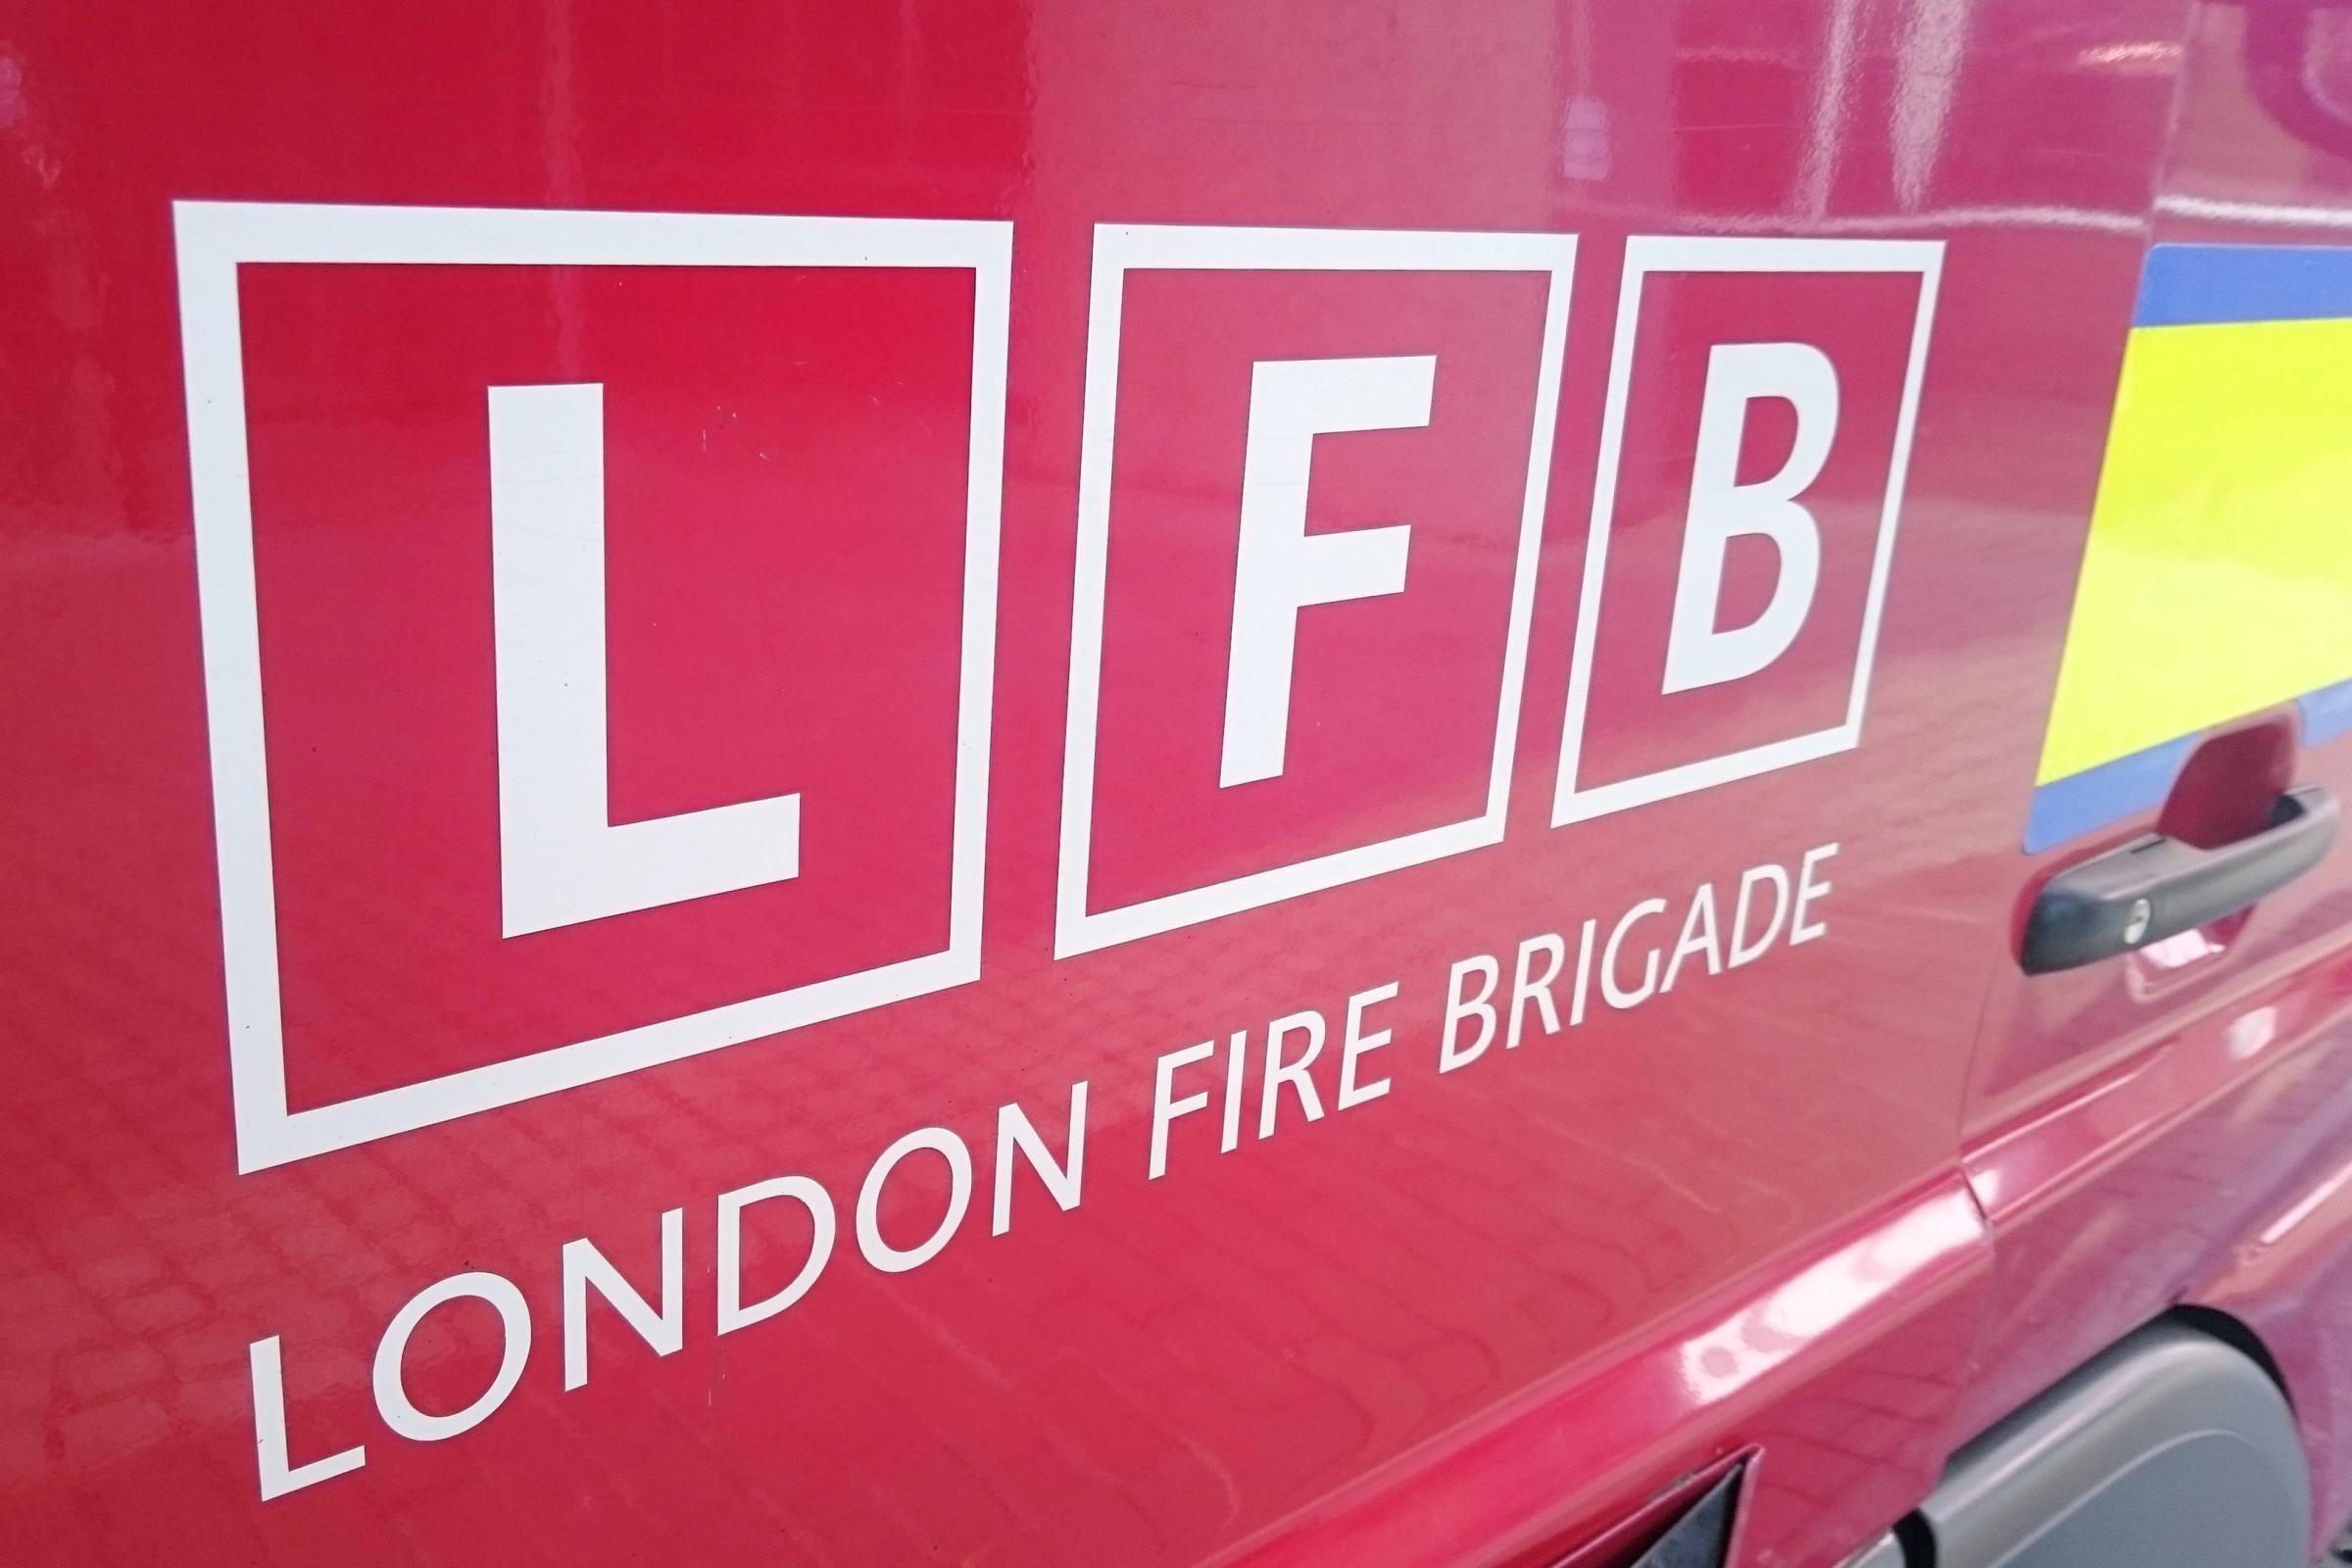 Londoners urged to have say on how firefighters deal with terrorism in the wake of Paris attacks